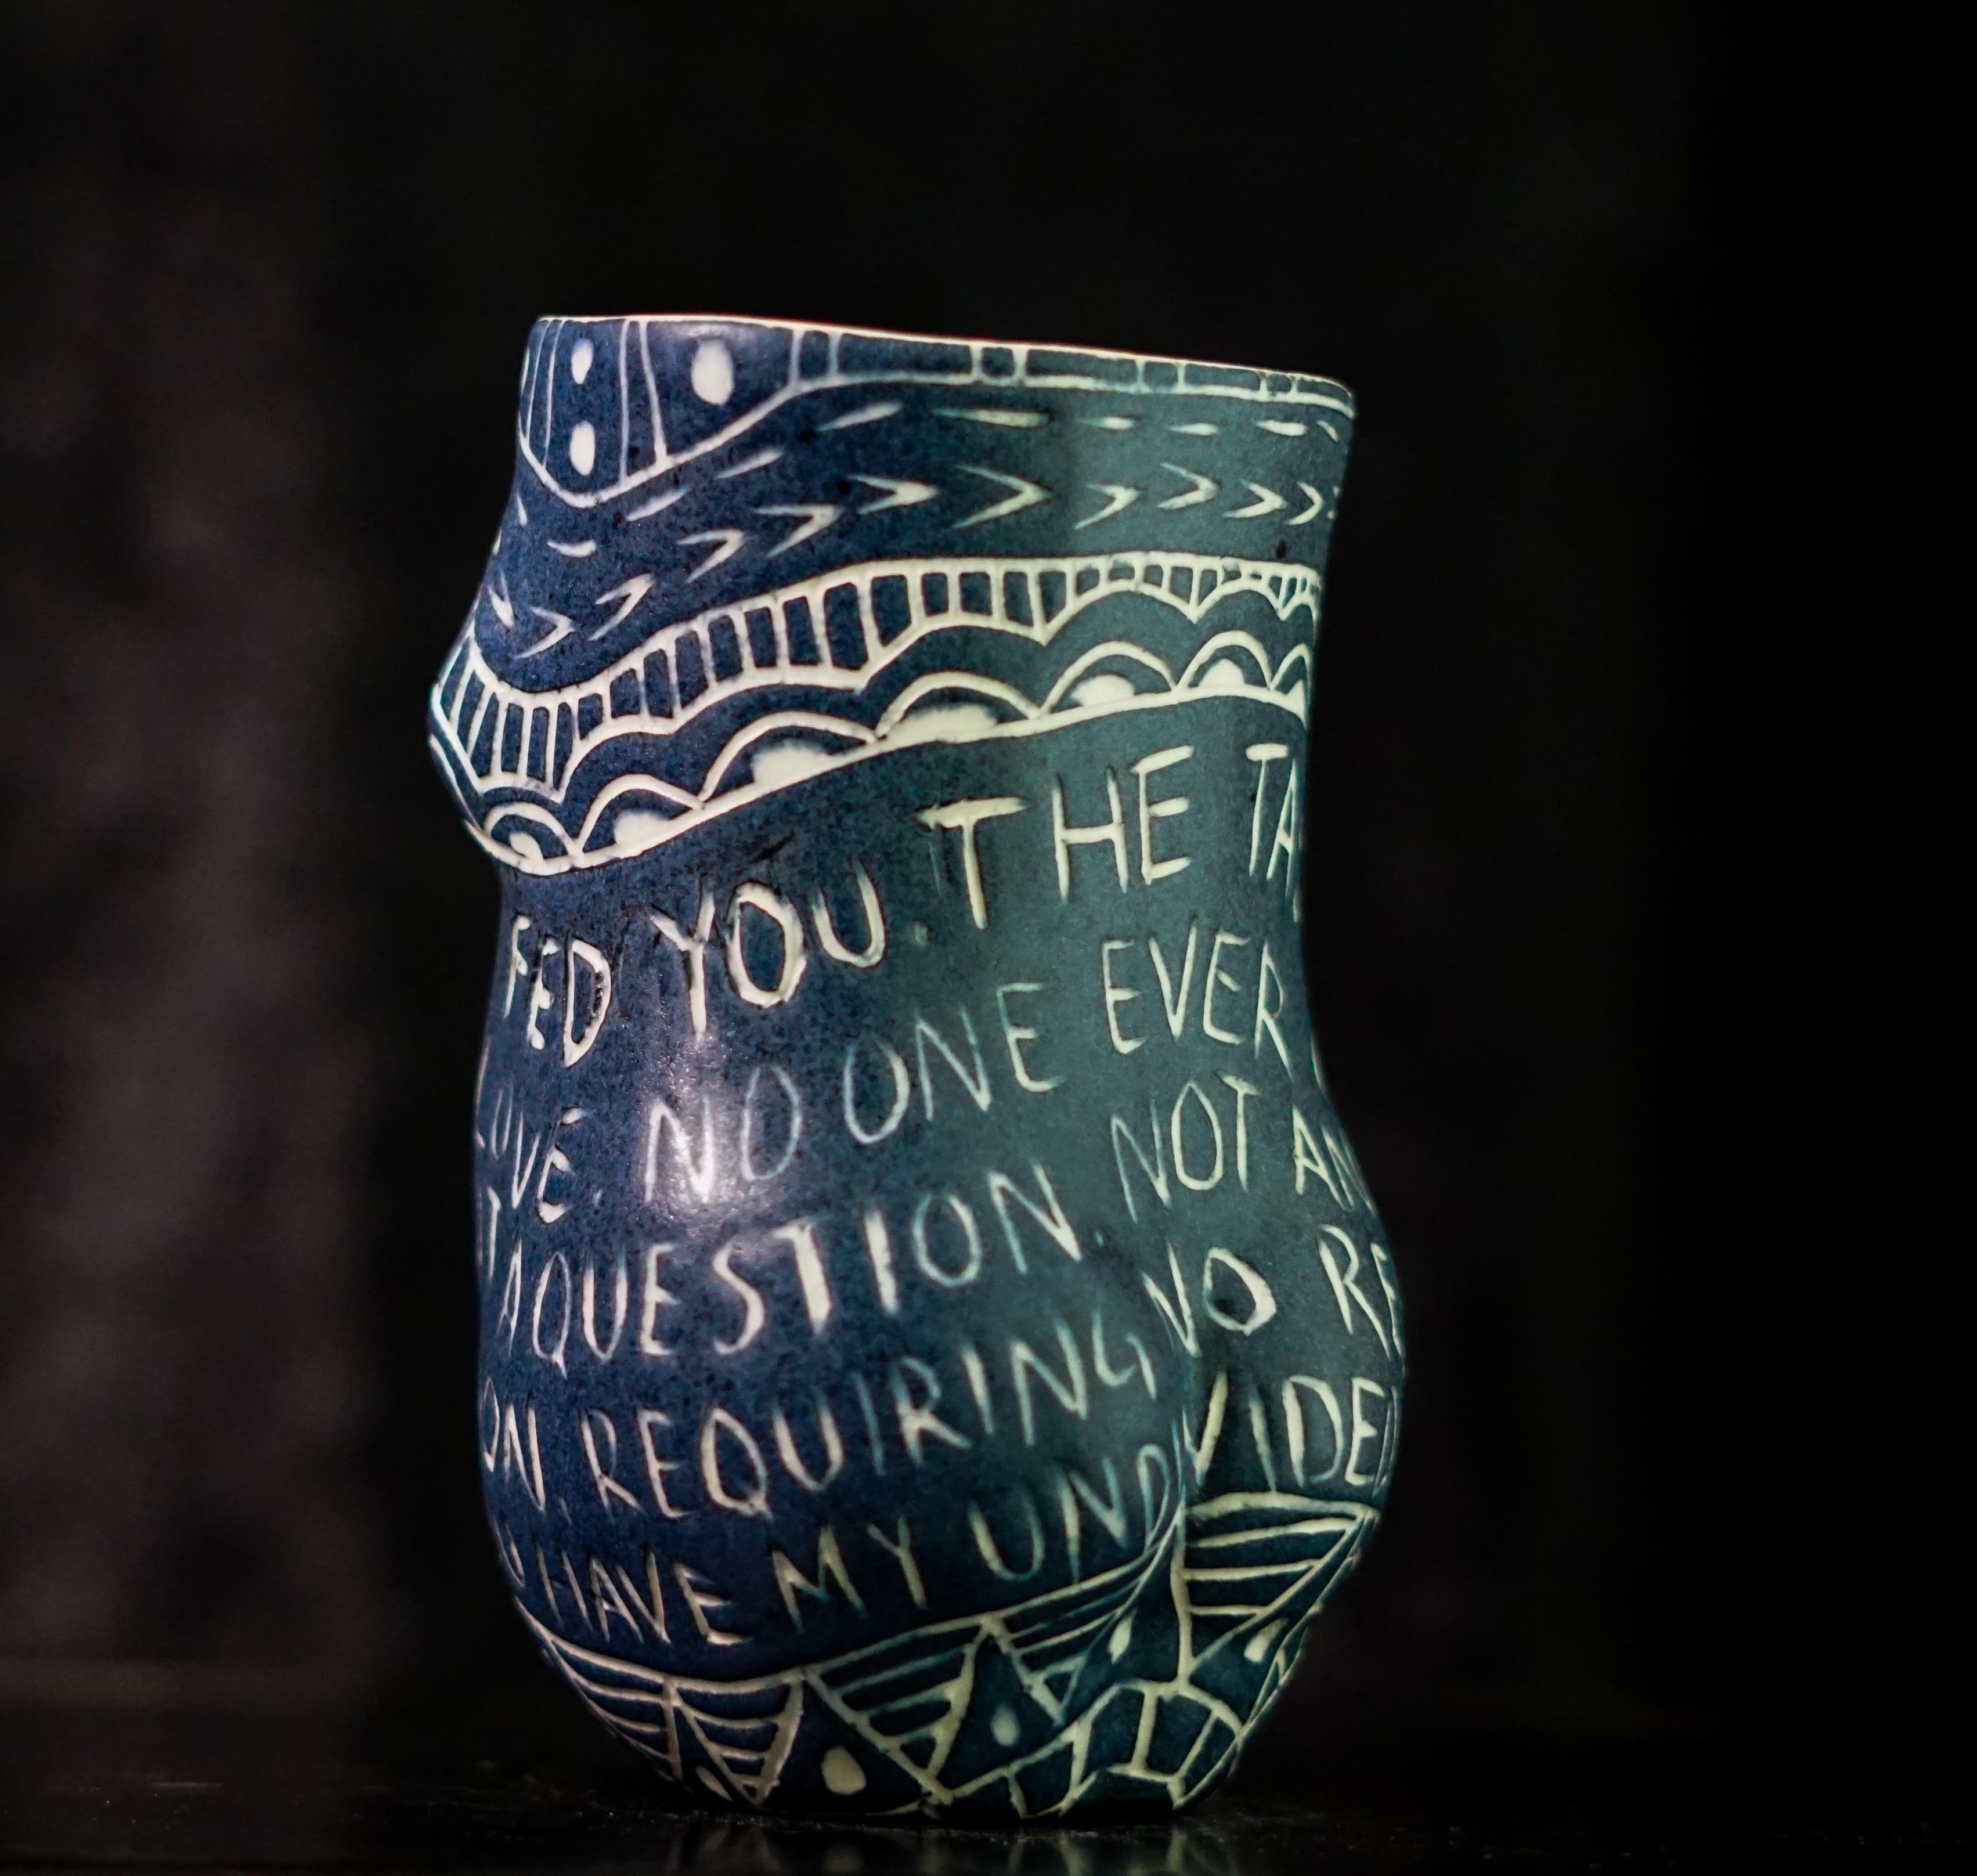 “No One Ever Fed You...”, 2019
From the series Fragments of Our Love Story
Porcelain cup with sgraffito detailing
5.5 x 3 x 3 inches.

“No one ever fed you..” No one ever fed you. The taste of unanswered love. No one ever taught you. Love is not a